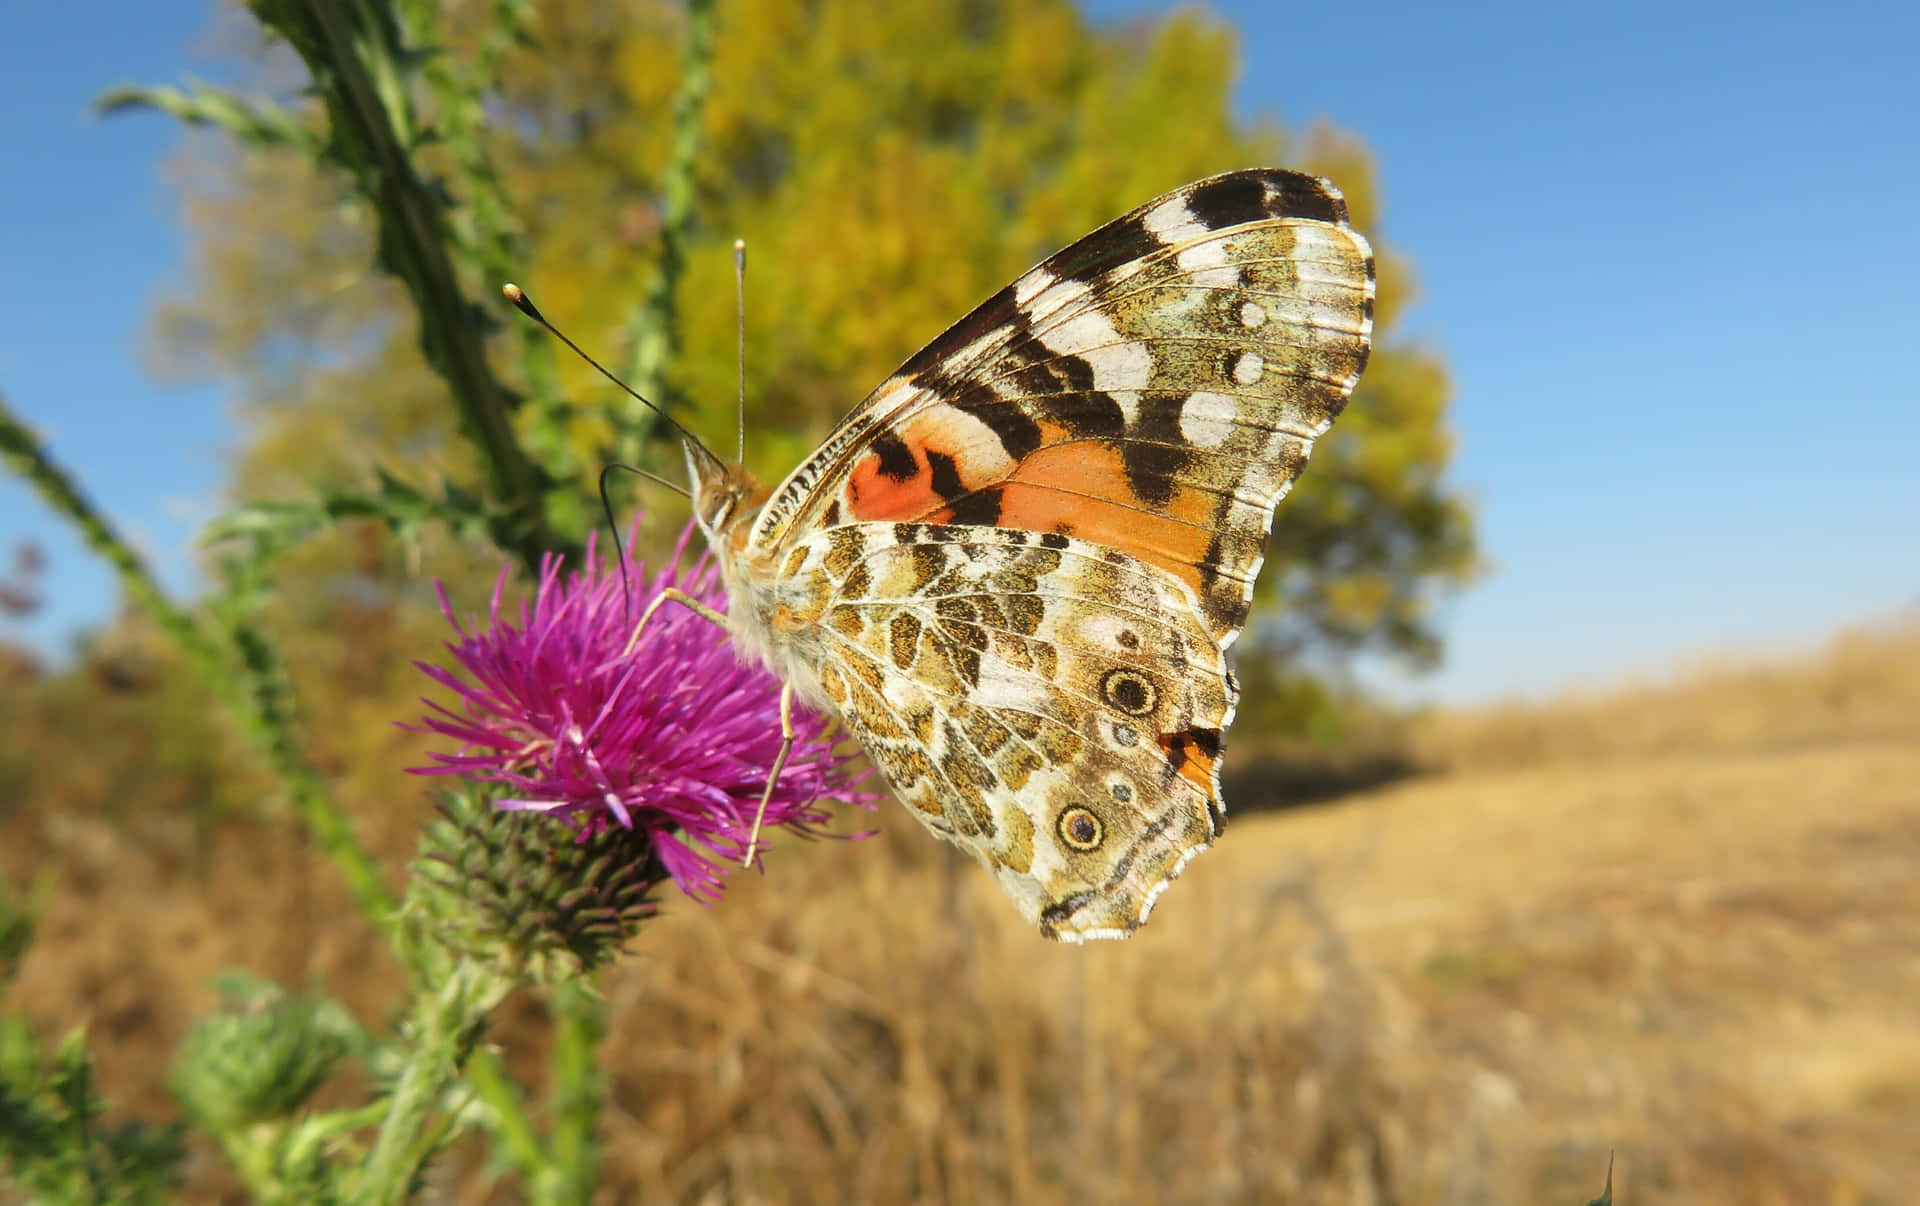 Painted Lady Butterflyon Thistle Wallpaper